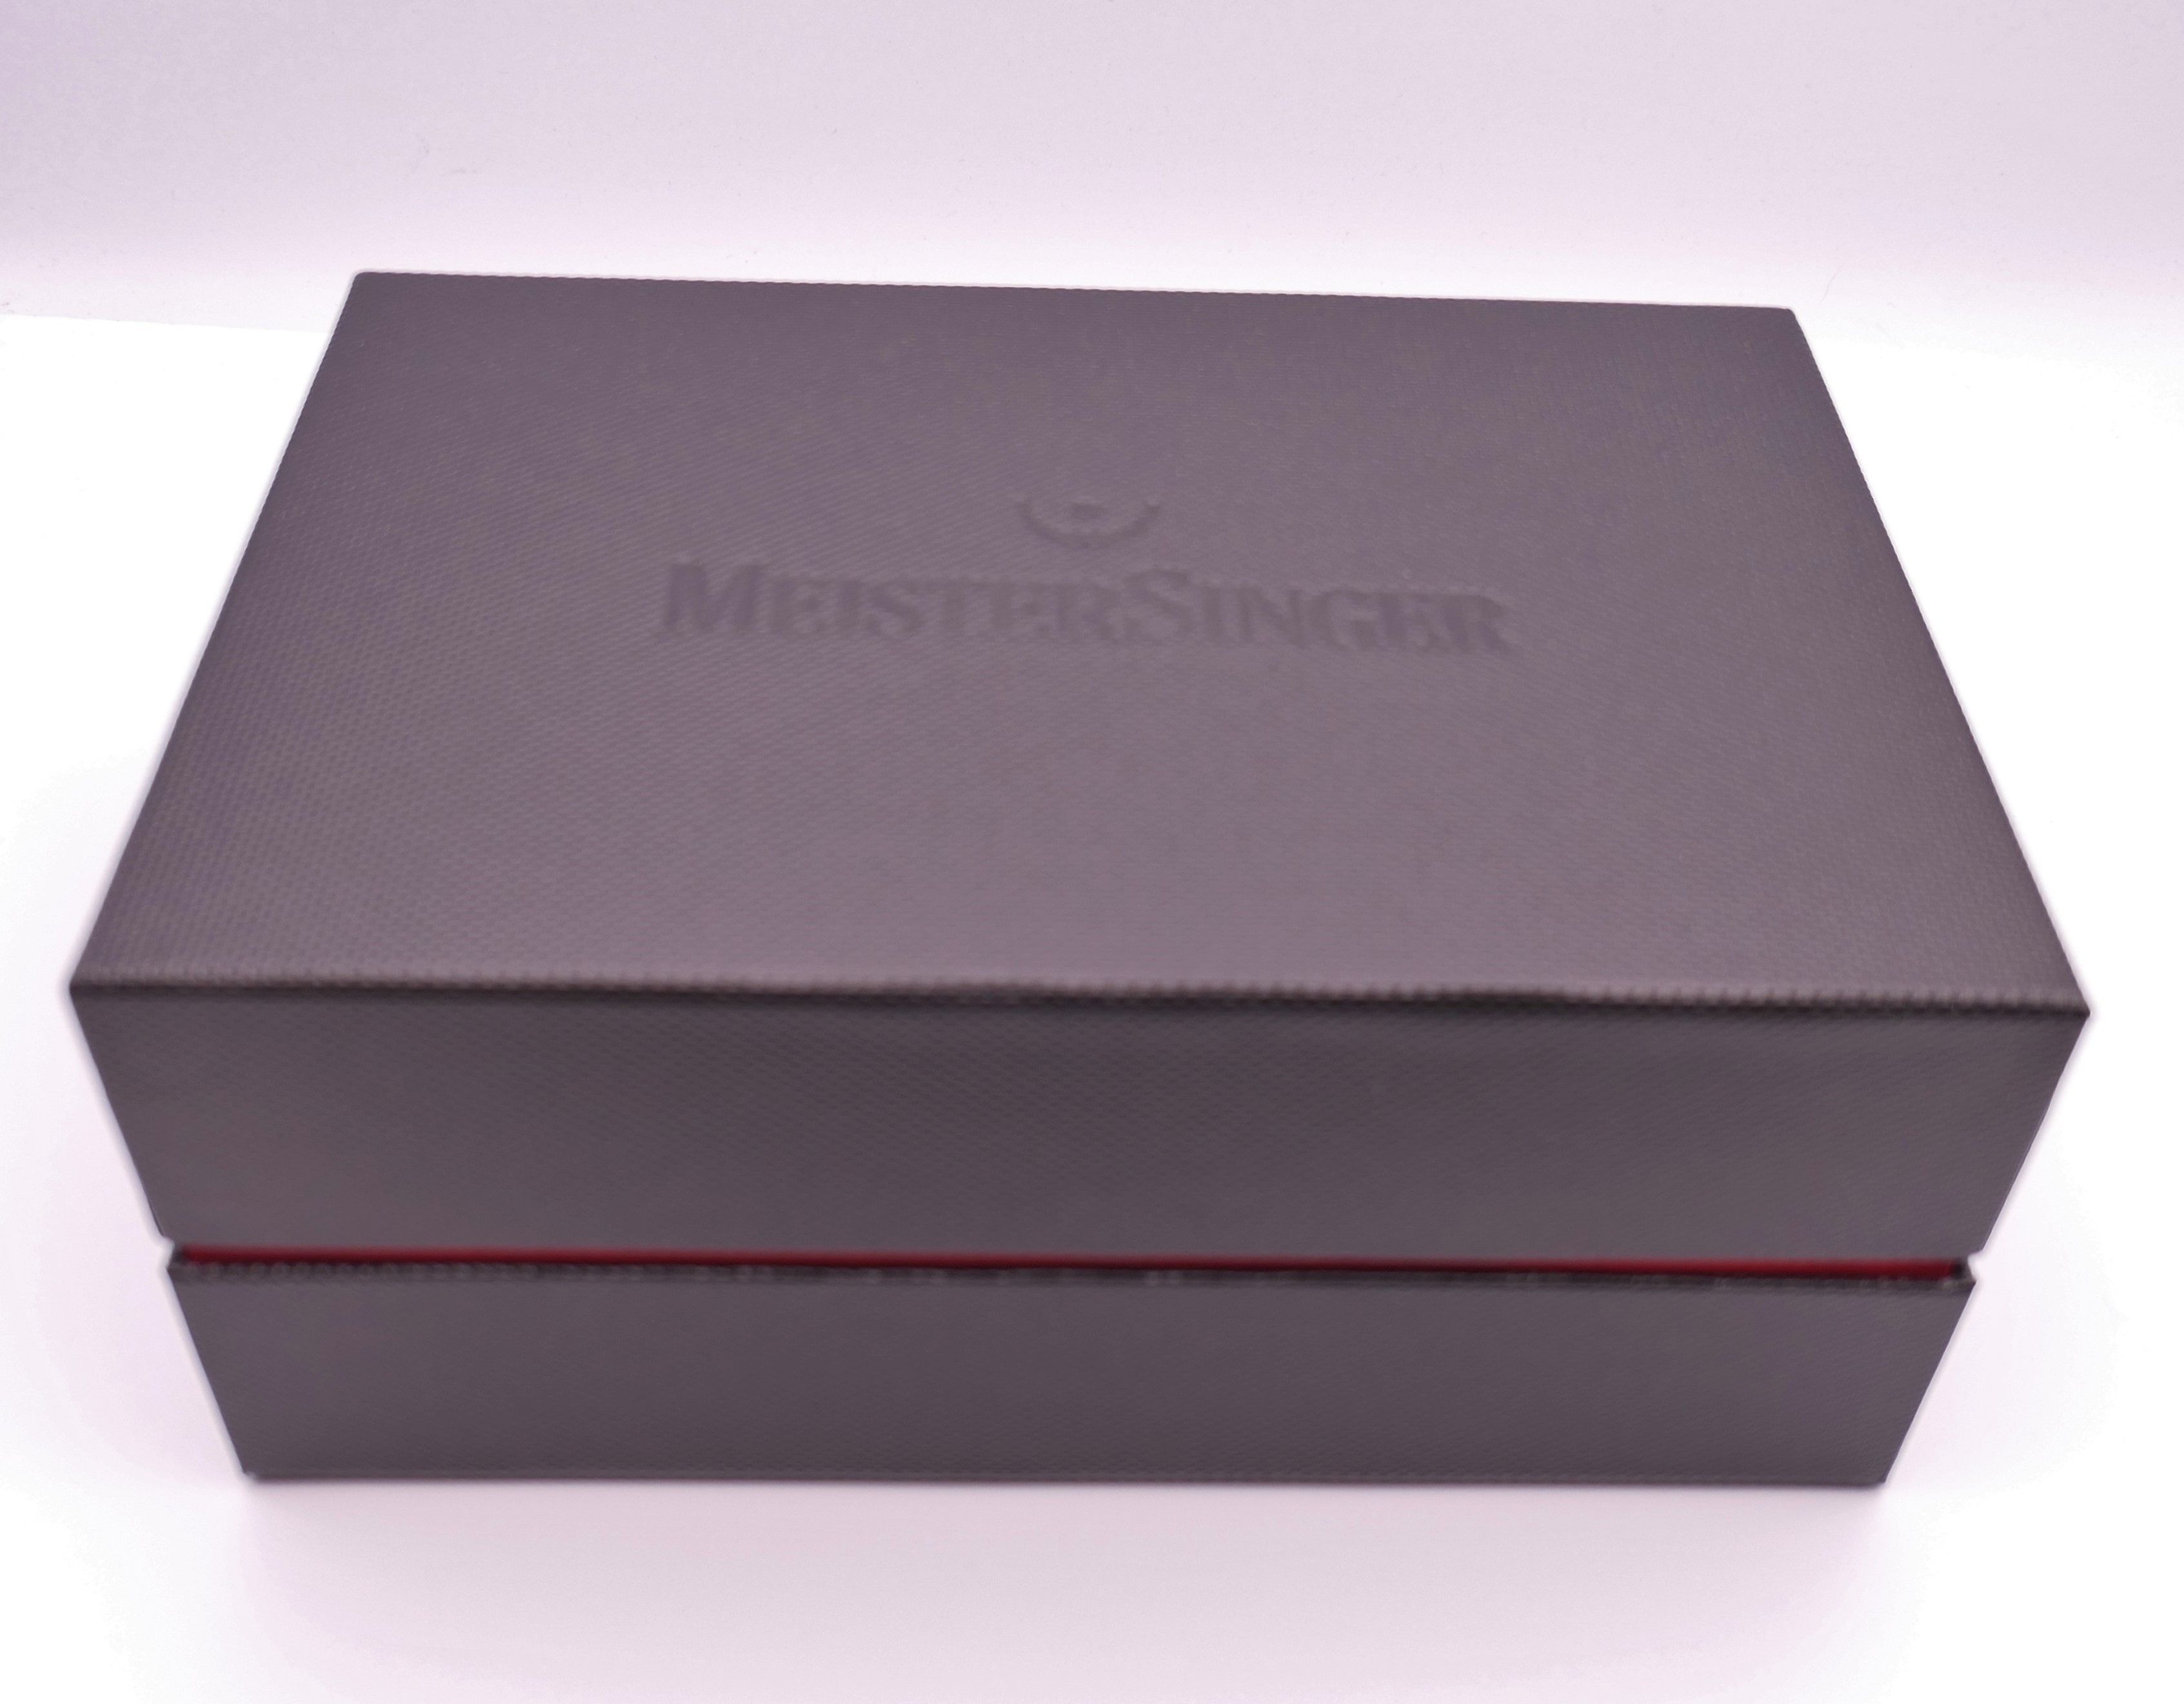 A boxed limited edition Meistersinger Perigraph gentleman's wristwatch. 4.5 cm wide. - Image 20 of 20